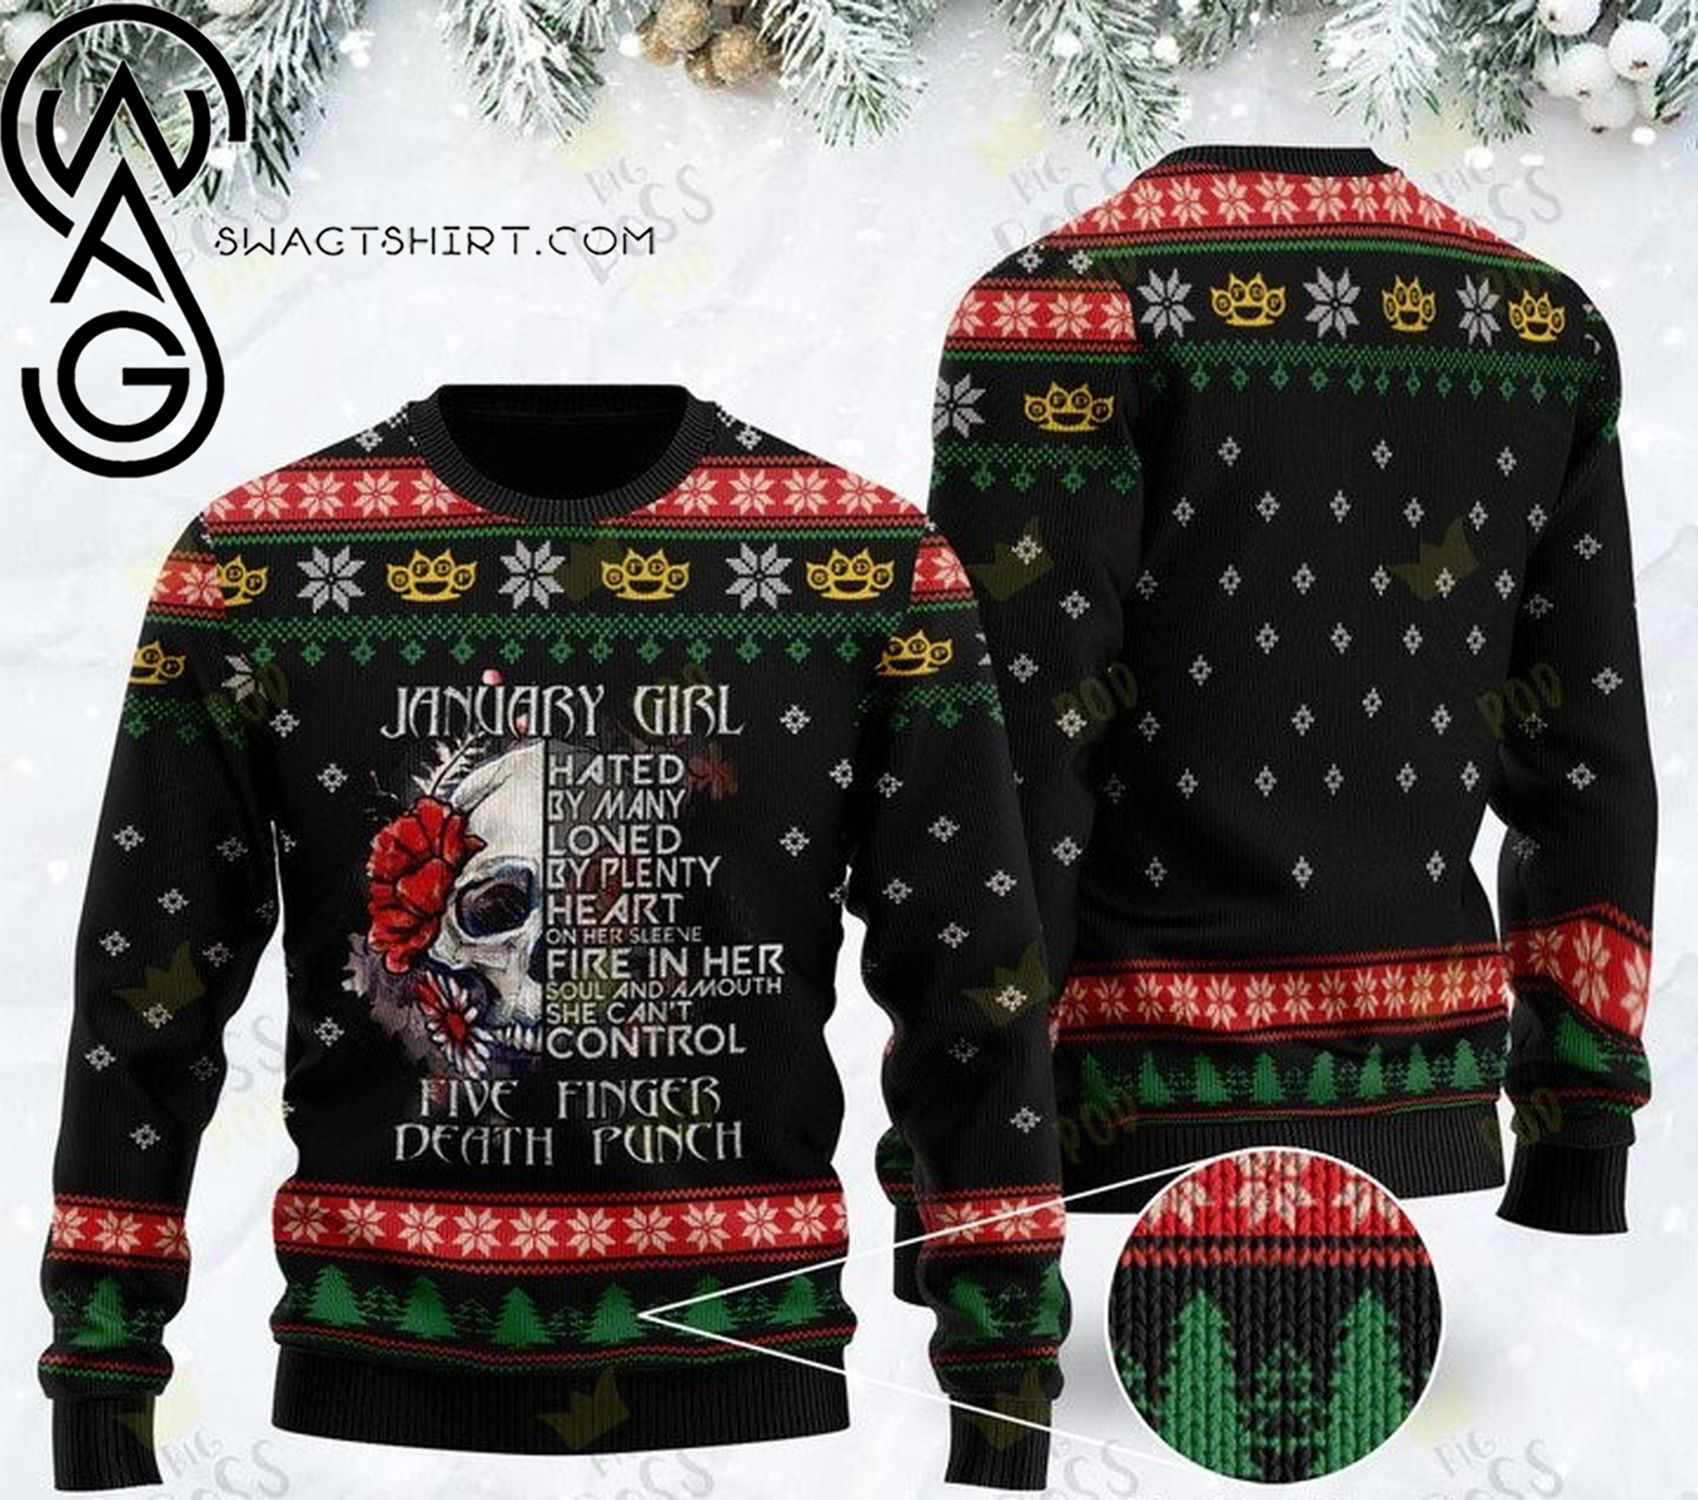 January girl five finger death punch ugly christmas sweater